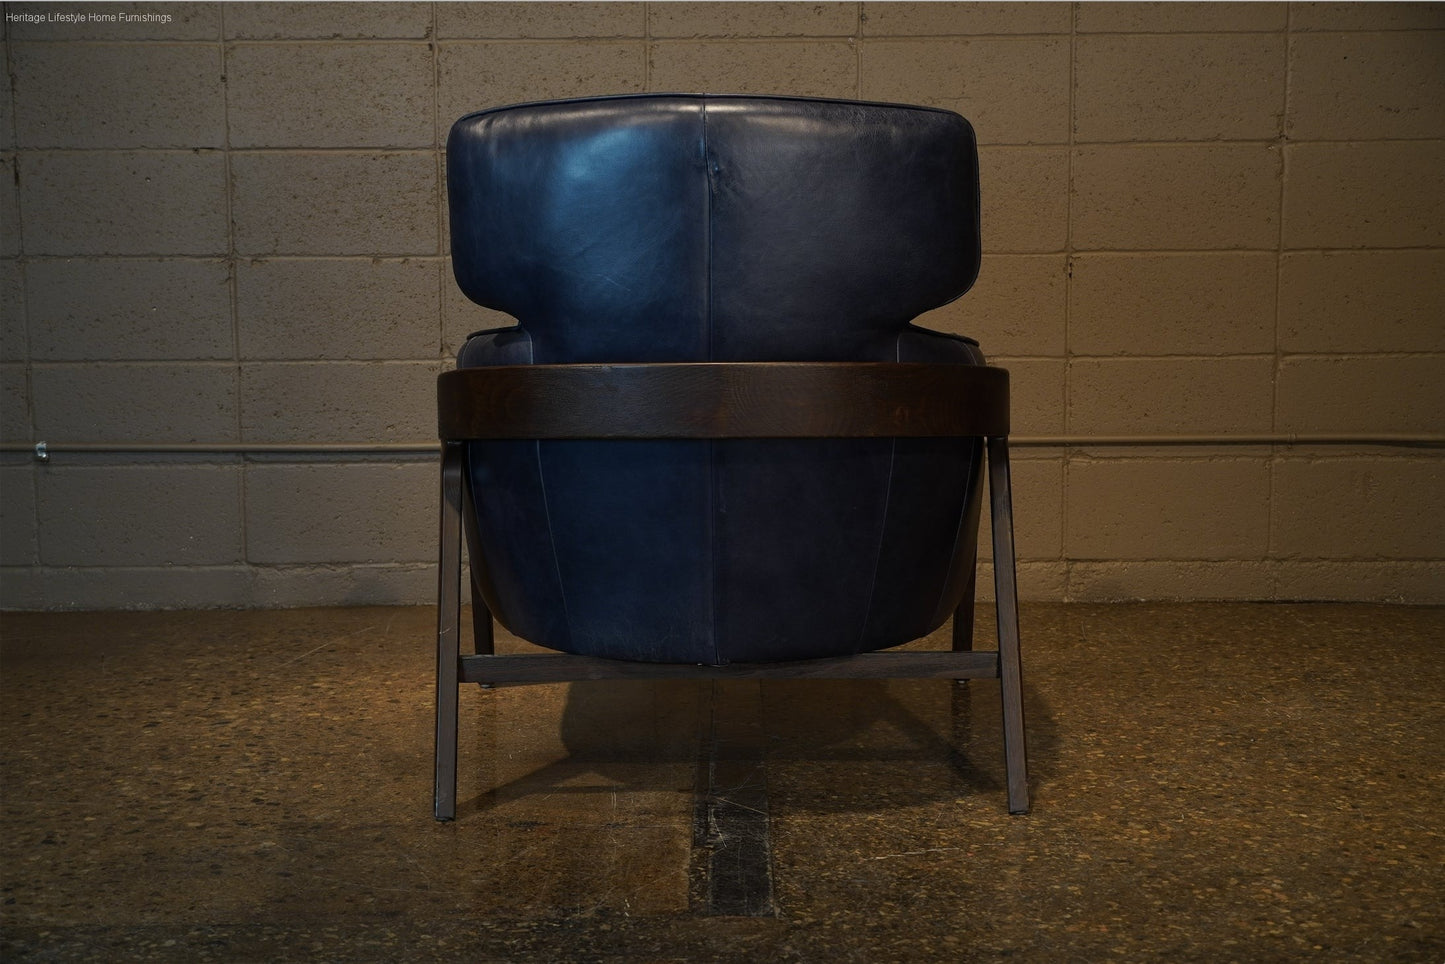 A993-1(2A) Leather Accent Chair - Navy Furniture Stores Burlington Ontario Near Me HLHF